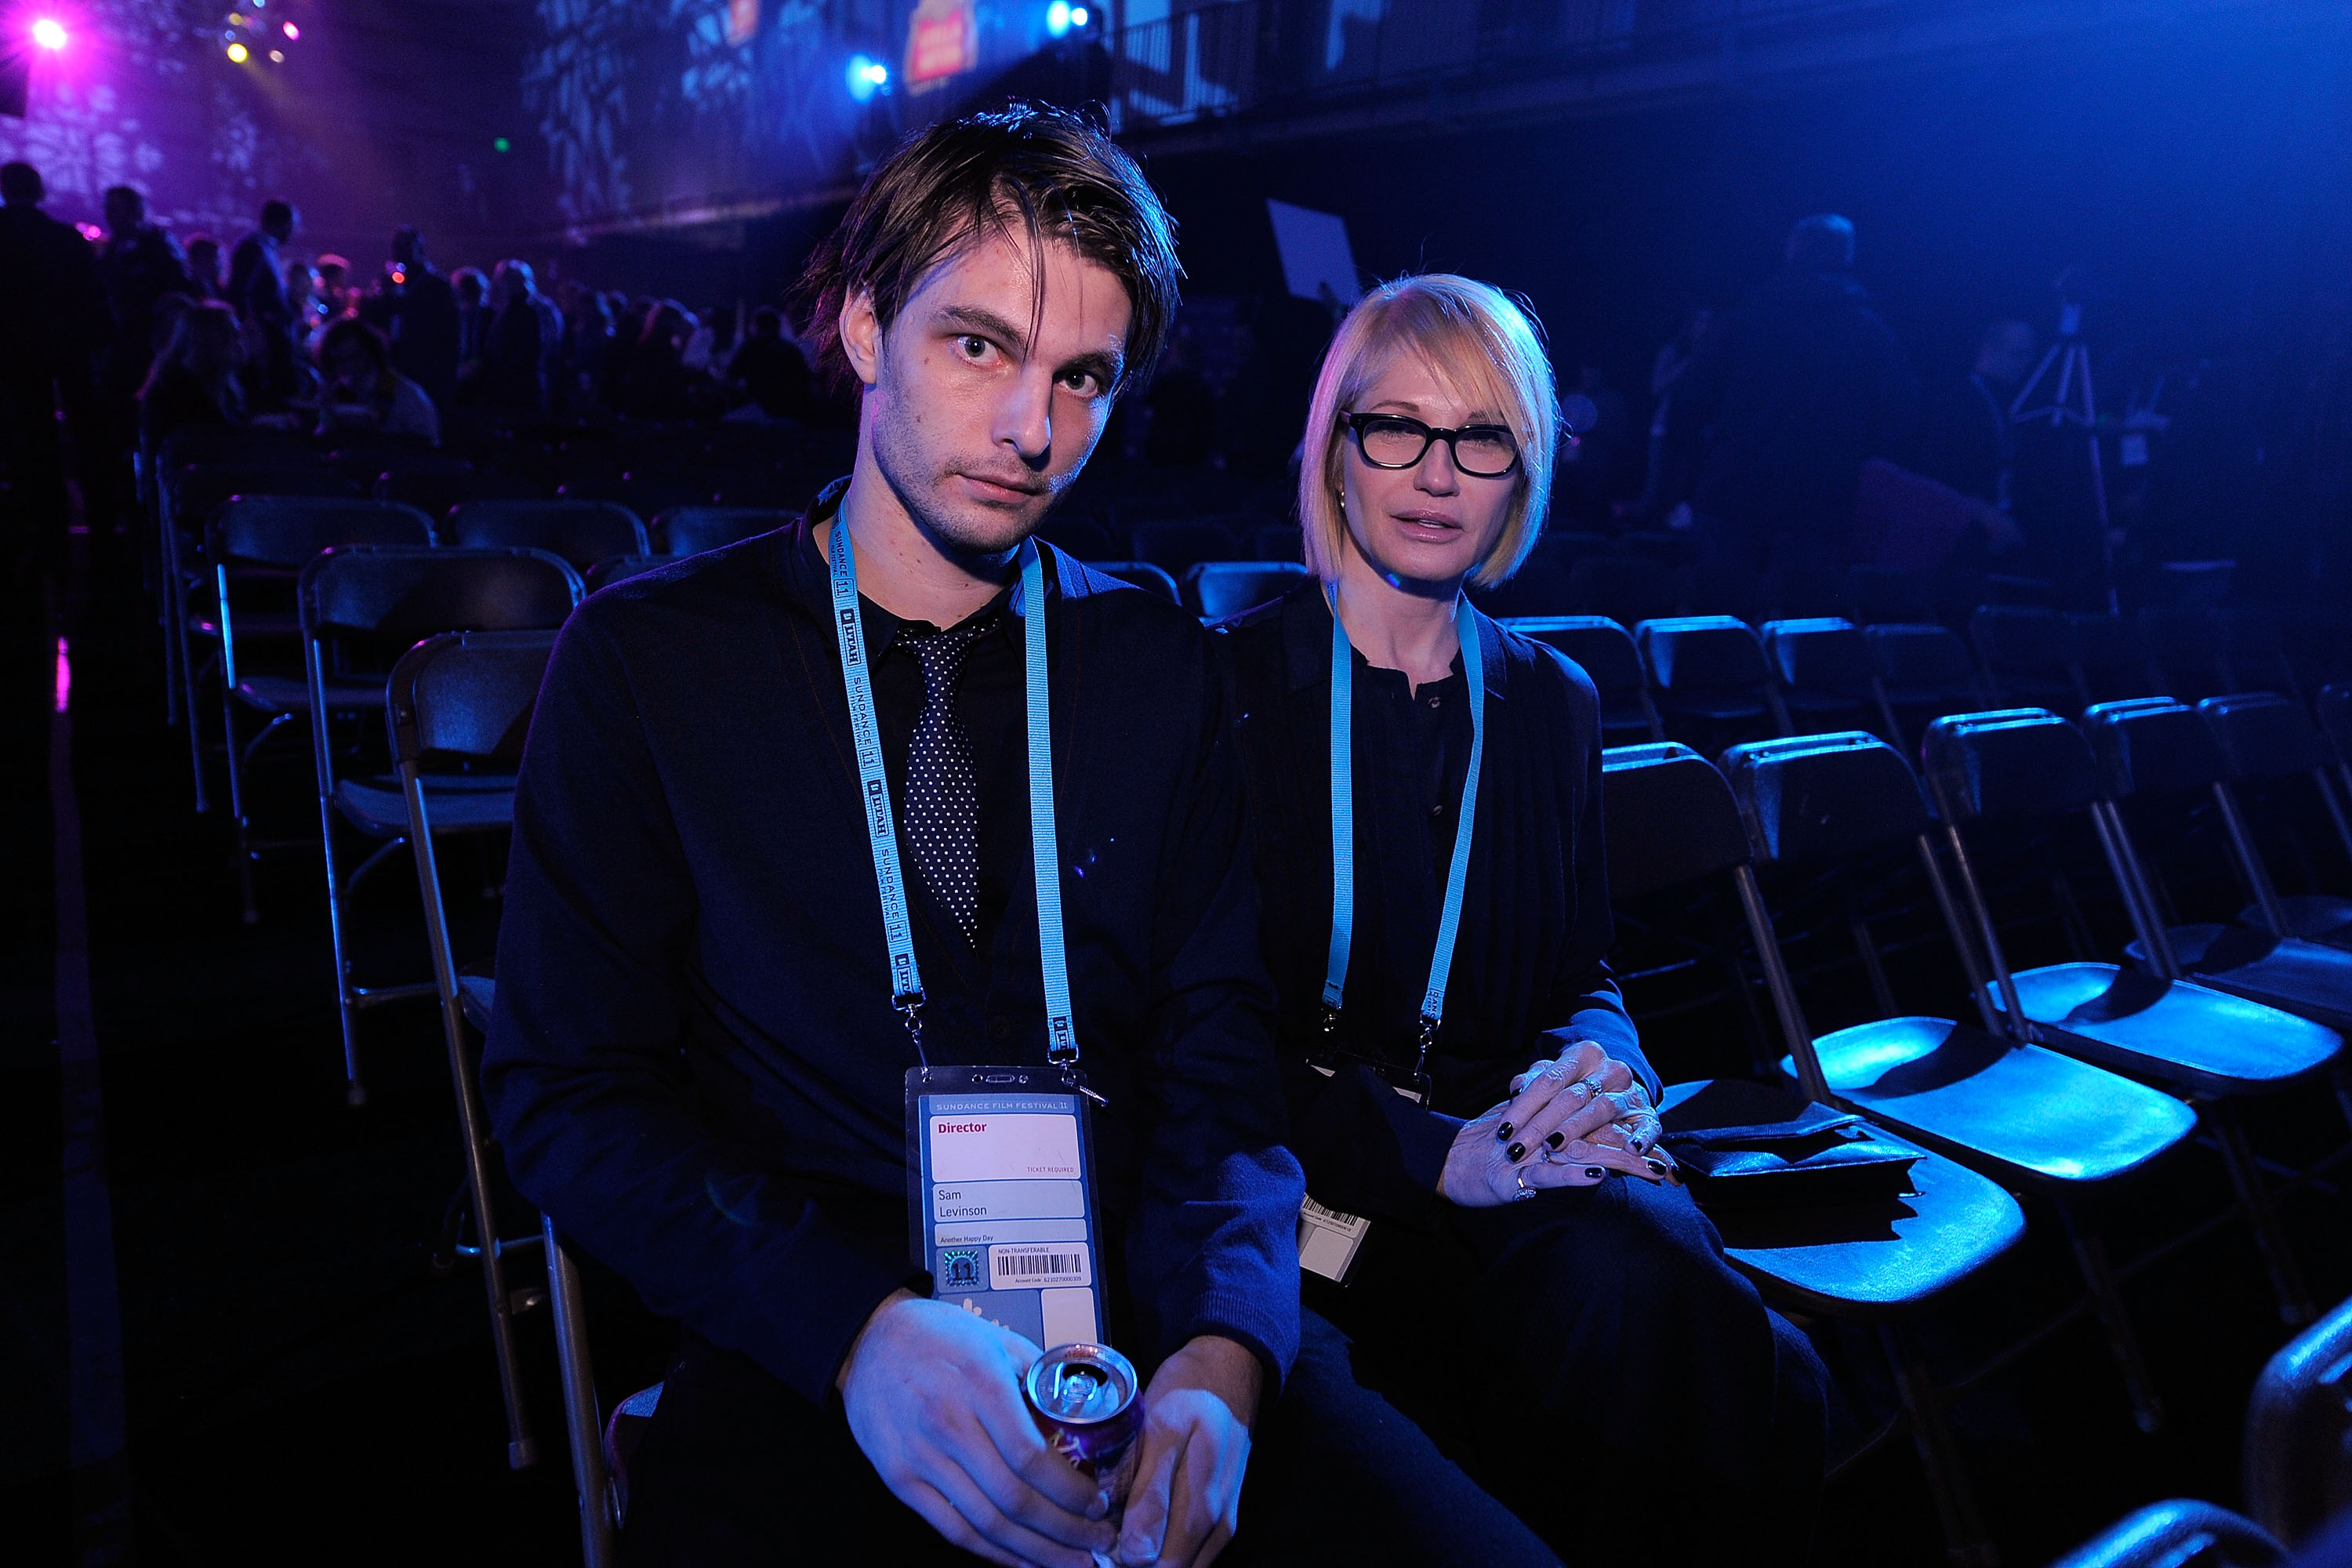 Sam Levinson and Ellen Barkin attend the 2011 Sundance Film Festival Awards Night Ceremony reception at Basin Recreation Field House, on January 29, 2011, in Park City, Utah. | Source: Getty Images